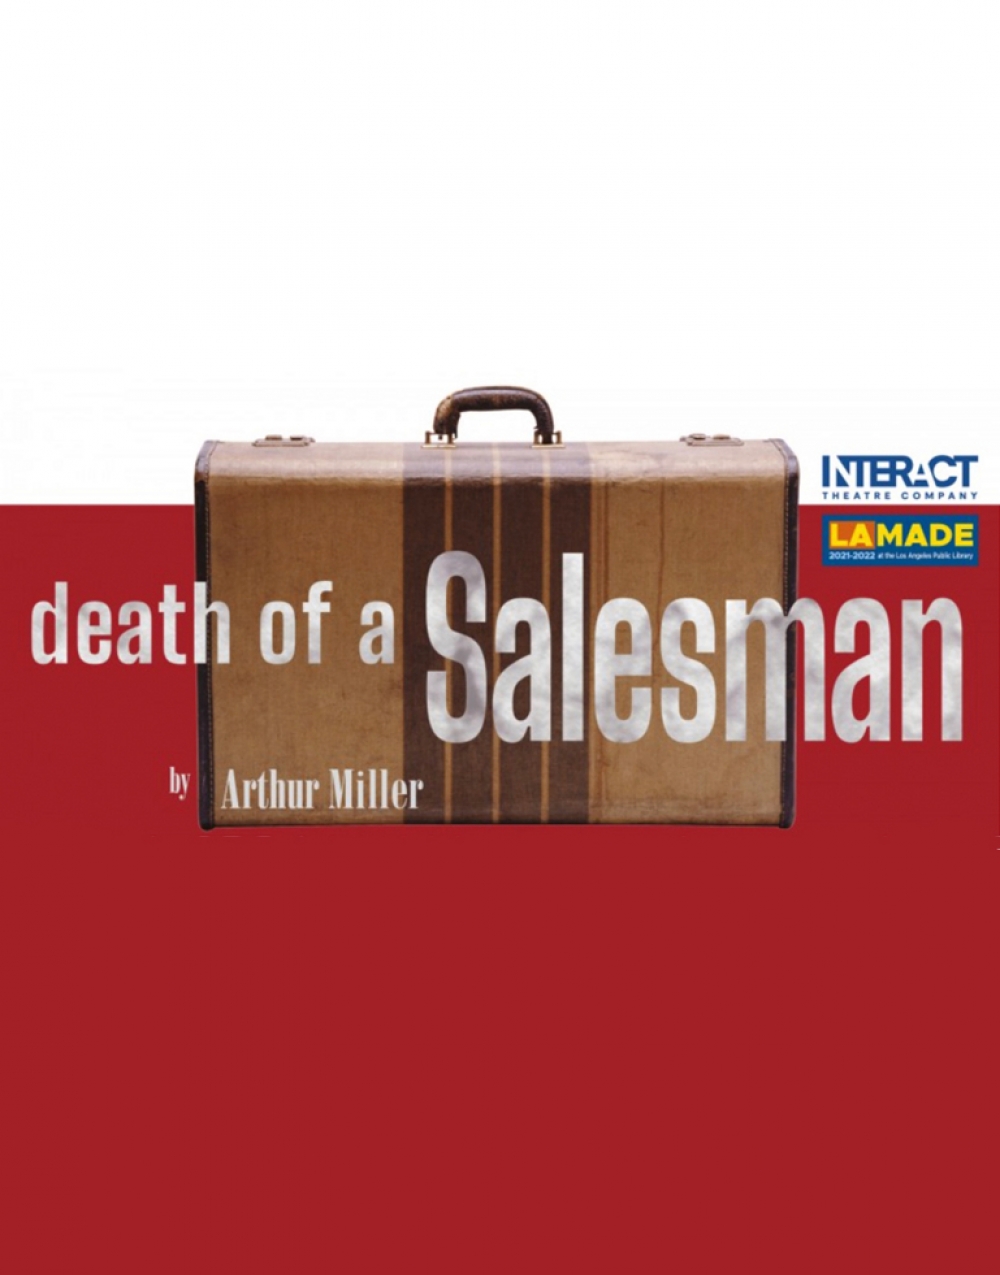 DEATH OF A SALESMAN by Arthur Miller - INTERACT THEATRE COMPANY Stage Mag